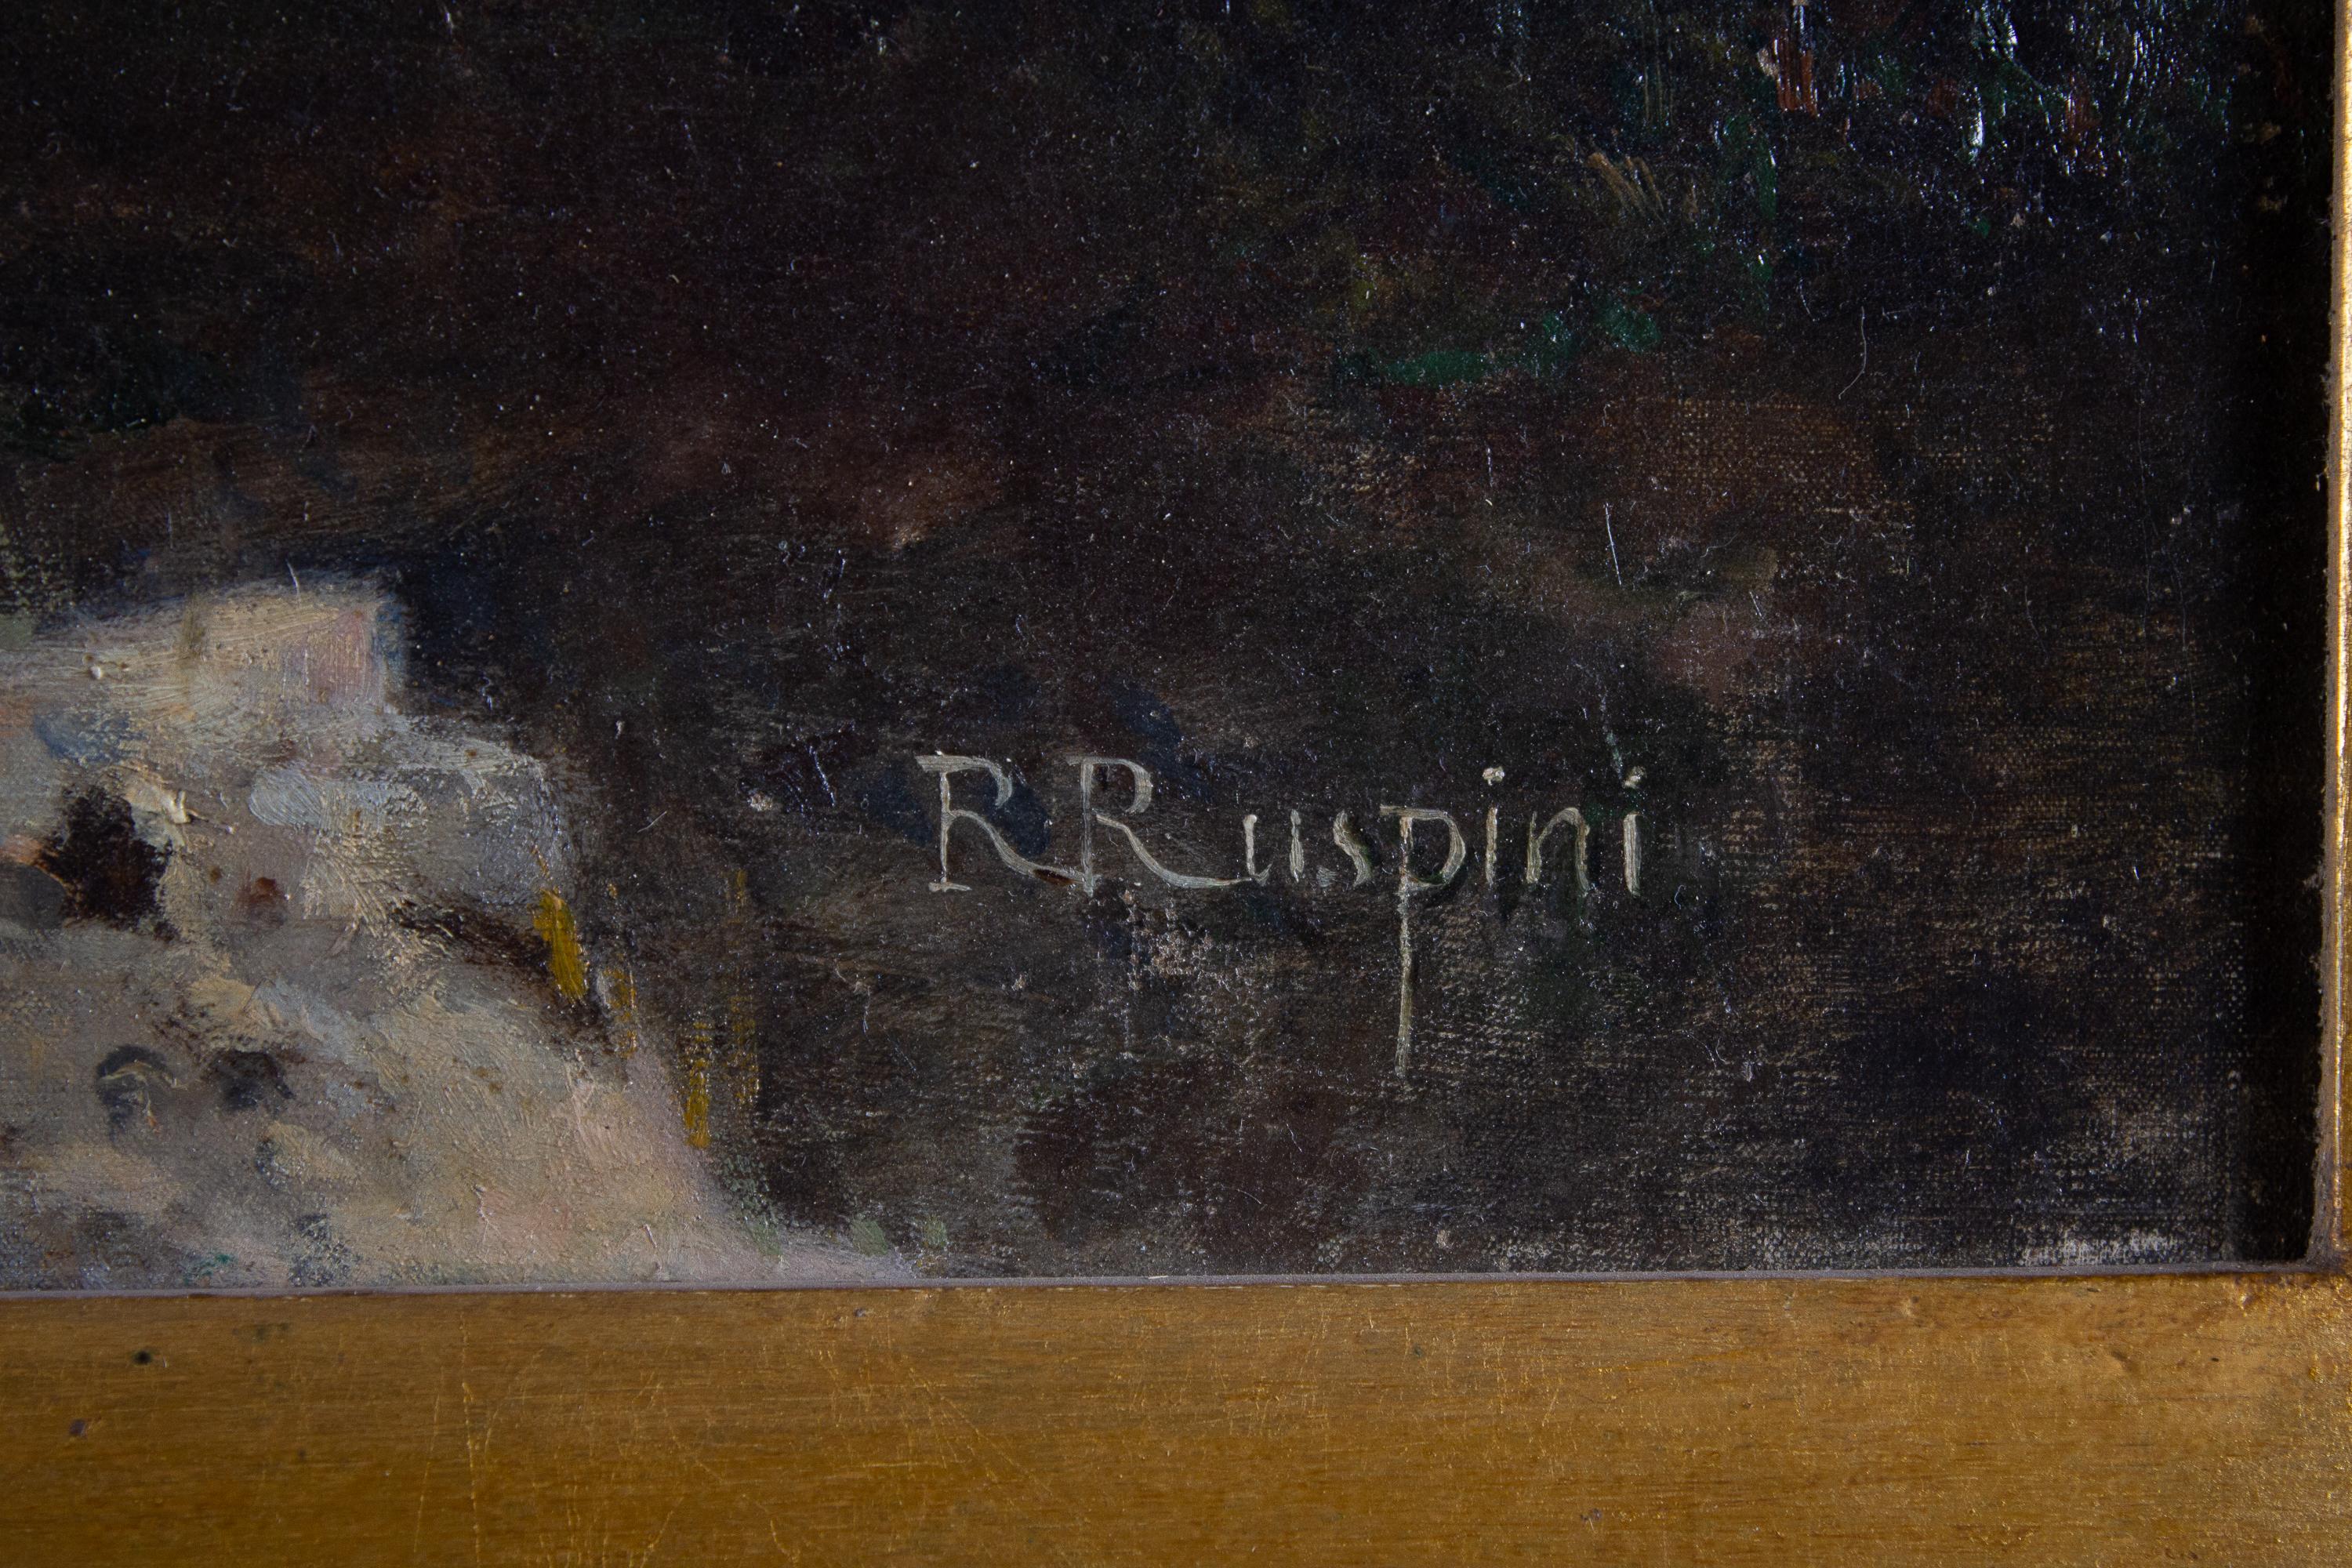 Roma via Appia Painting oil on Canvas By Ruspini Randolfo .1930-40
With a Giltwood frame of the same period.